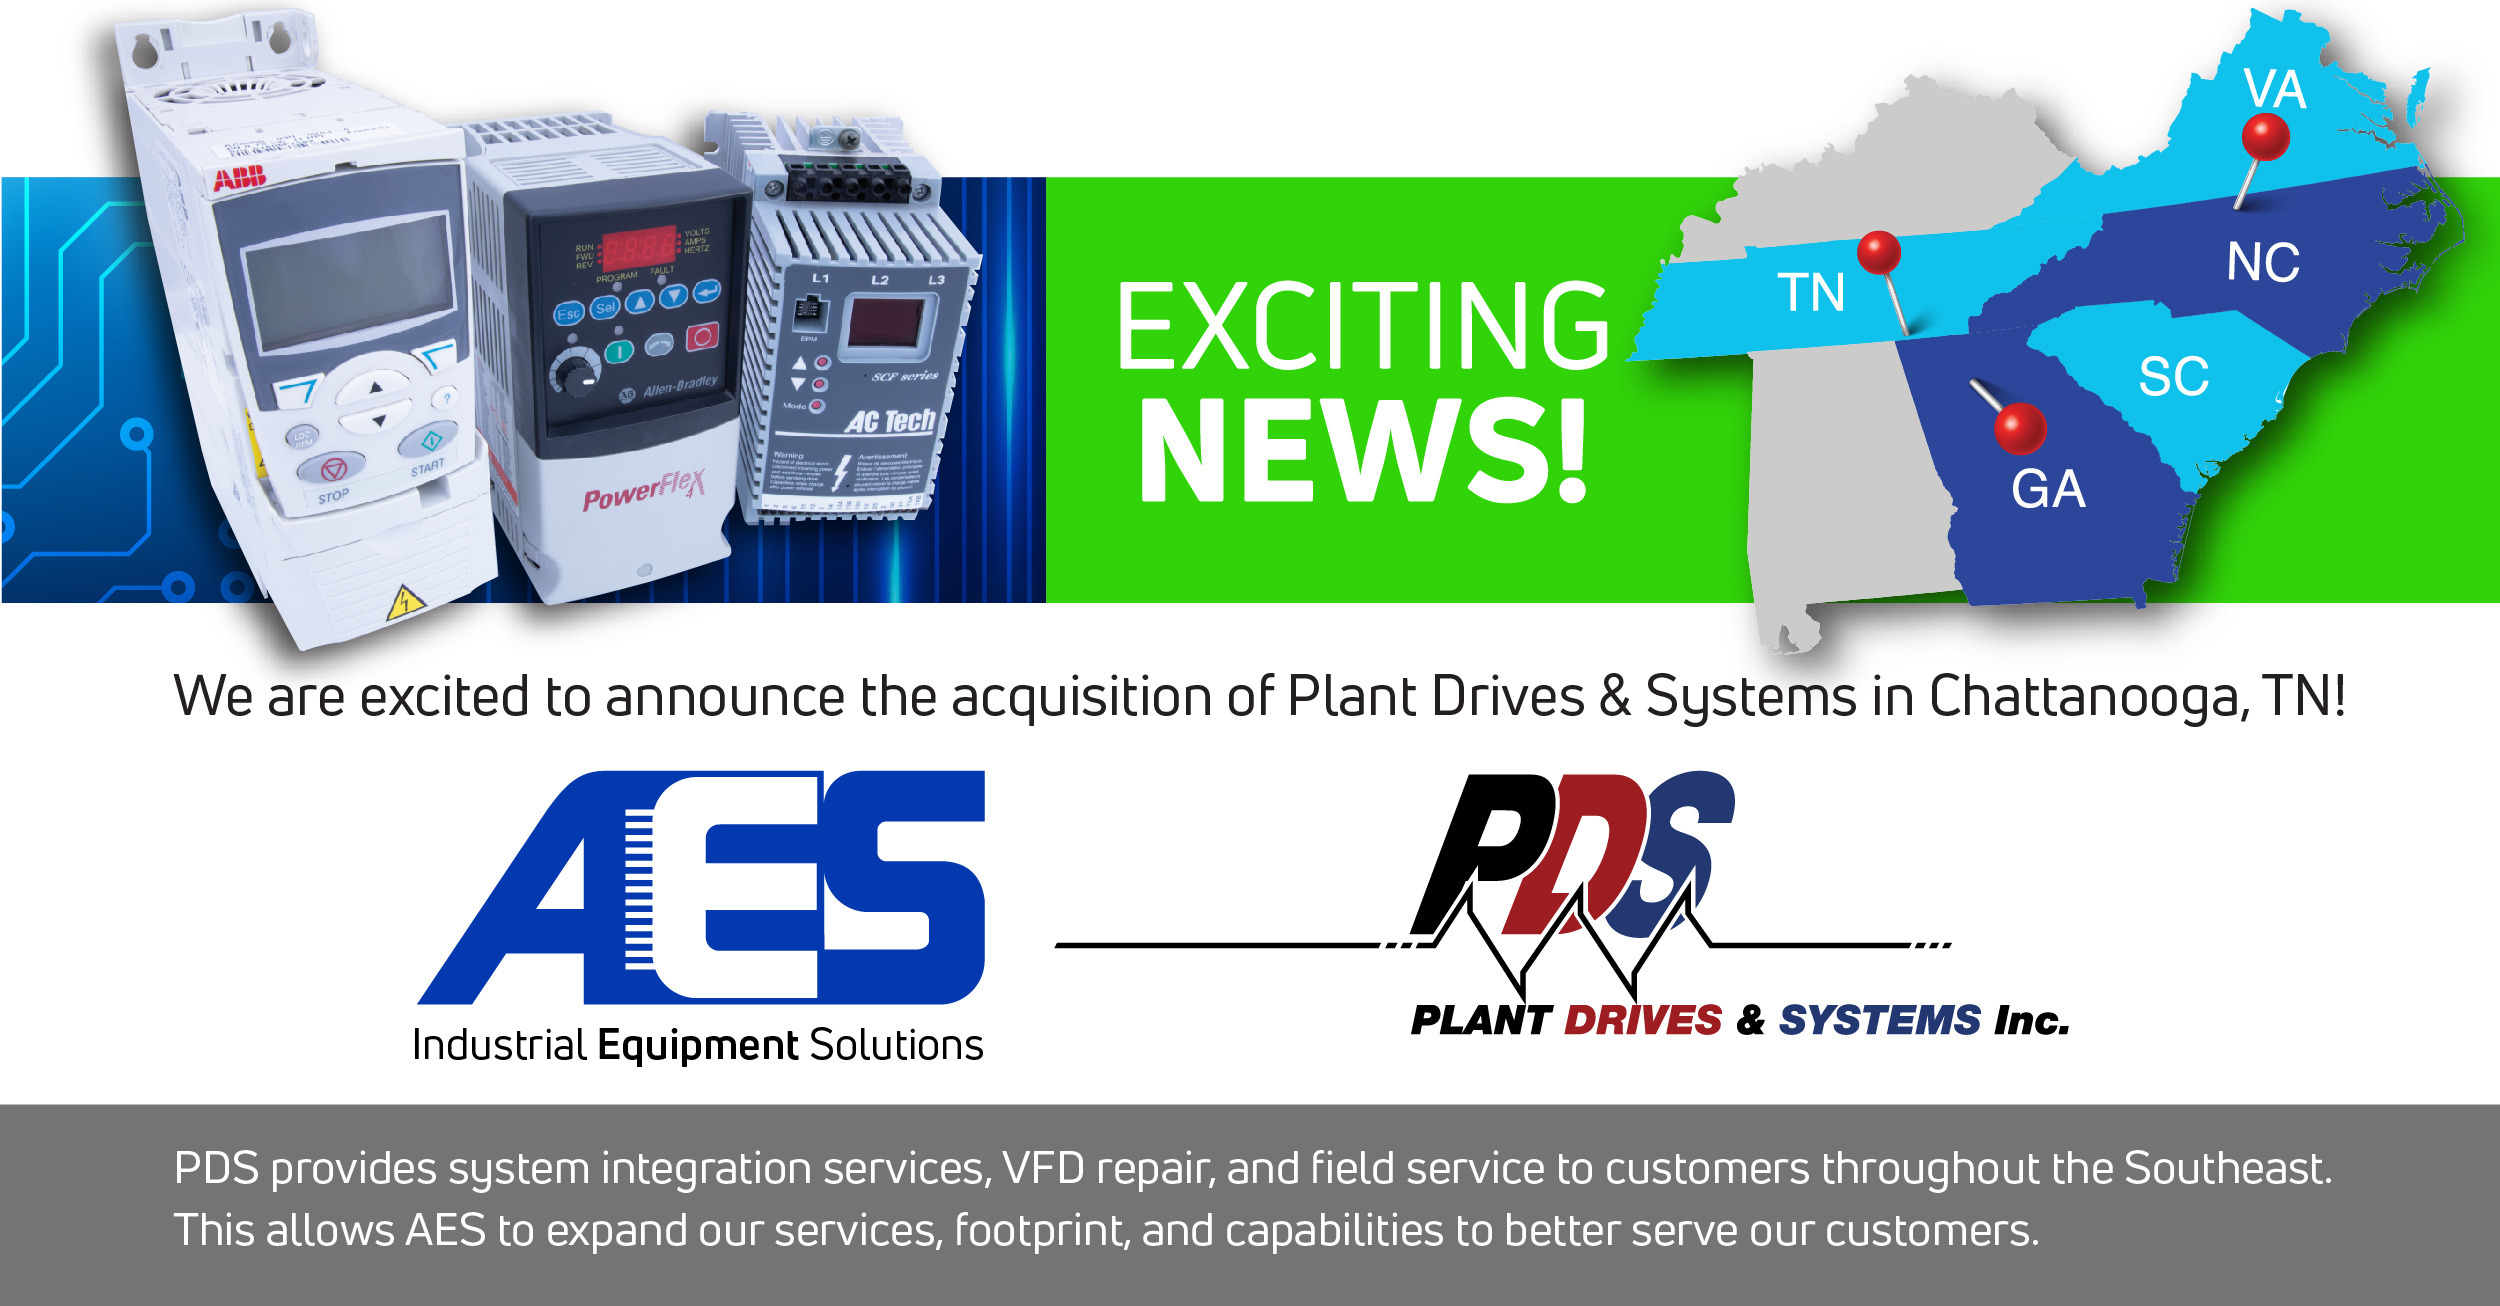 AES Inc expands to Tennessee by acquiring Plant Drives & Systems ("PDS")